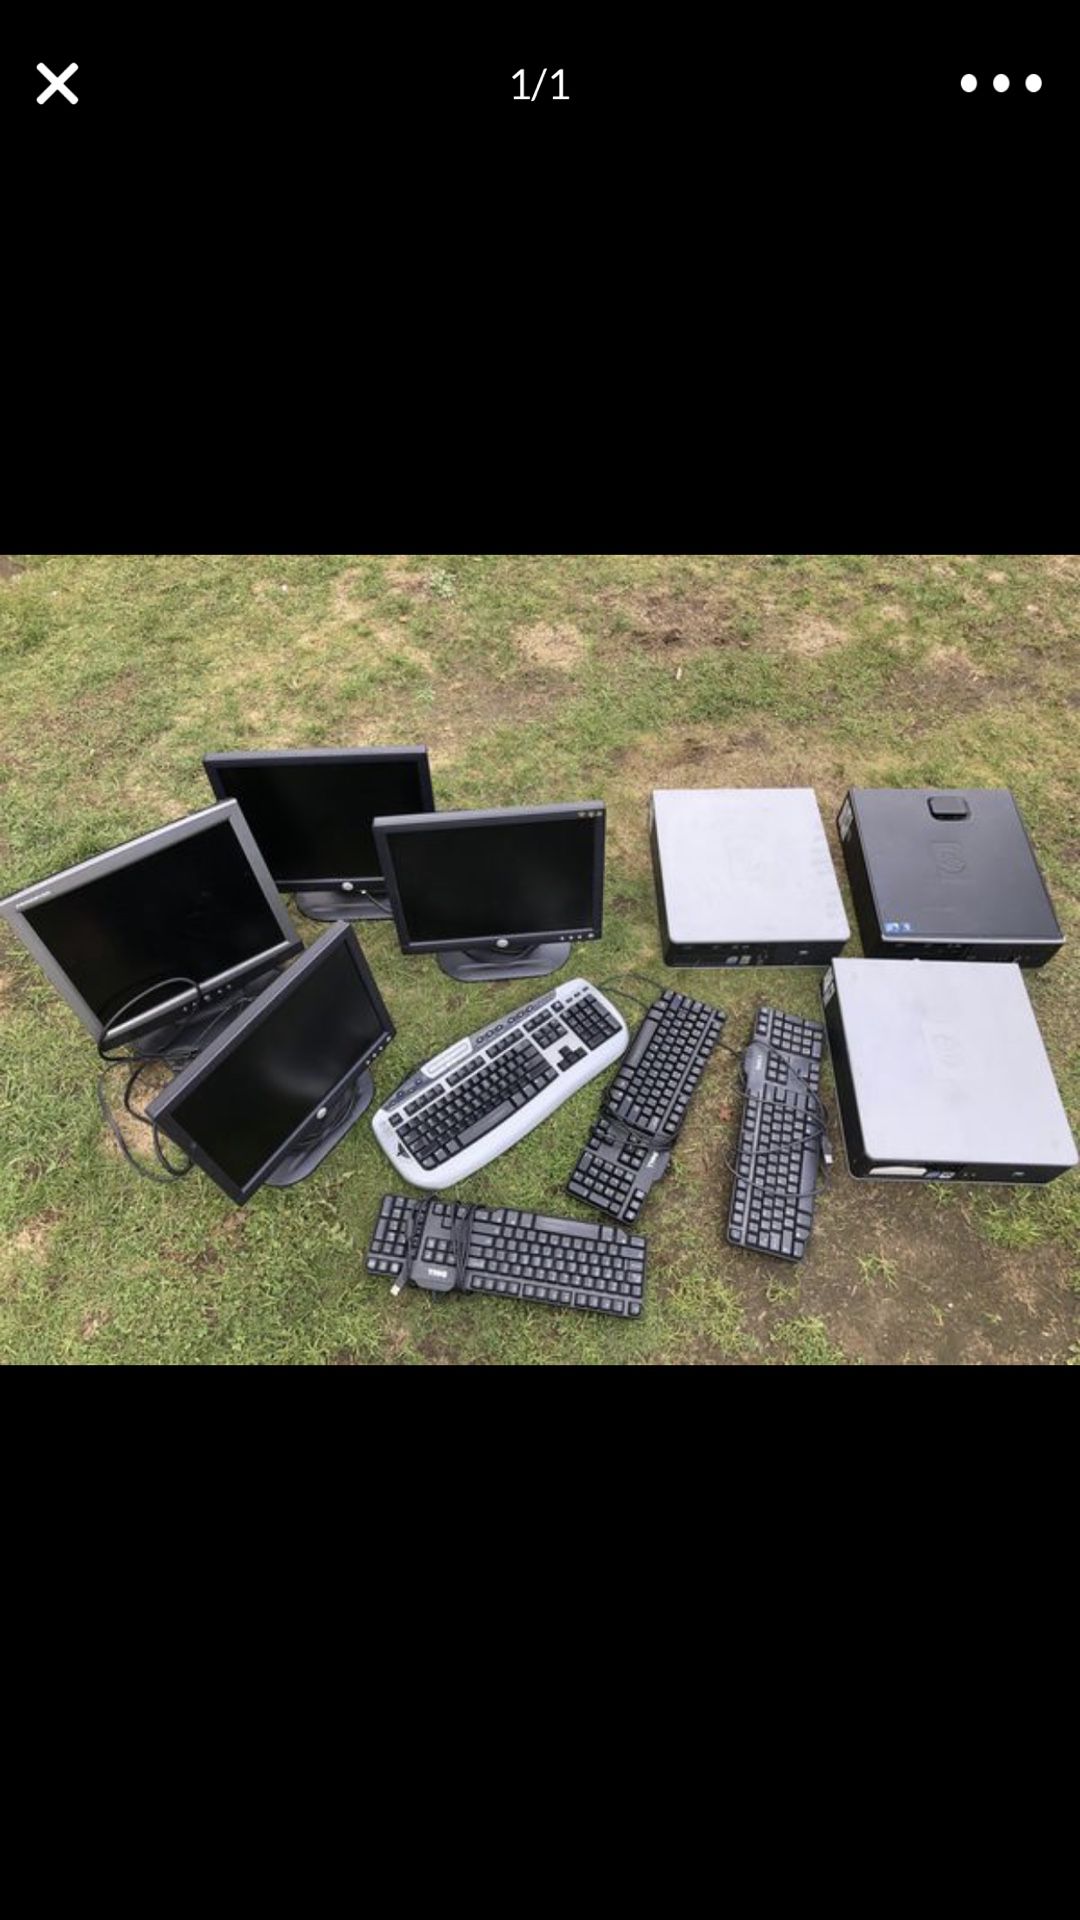 Computers w/keyboards